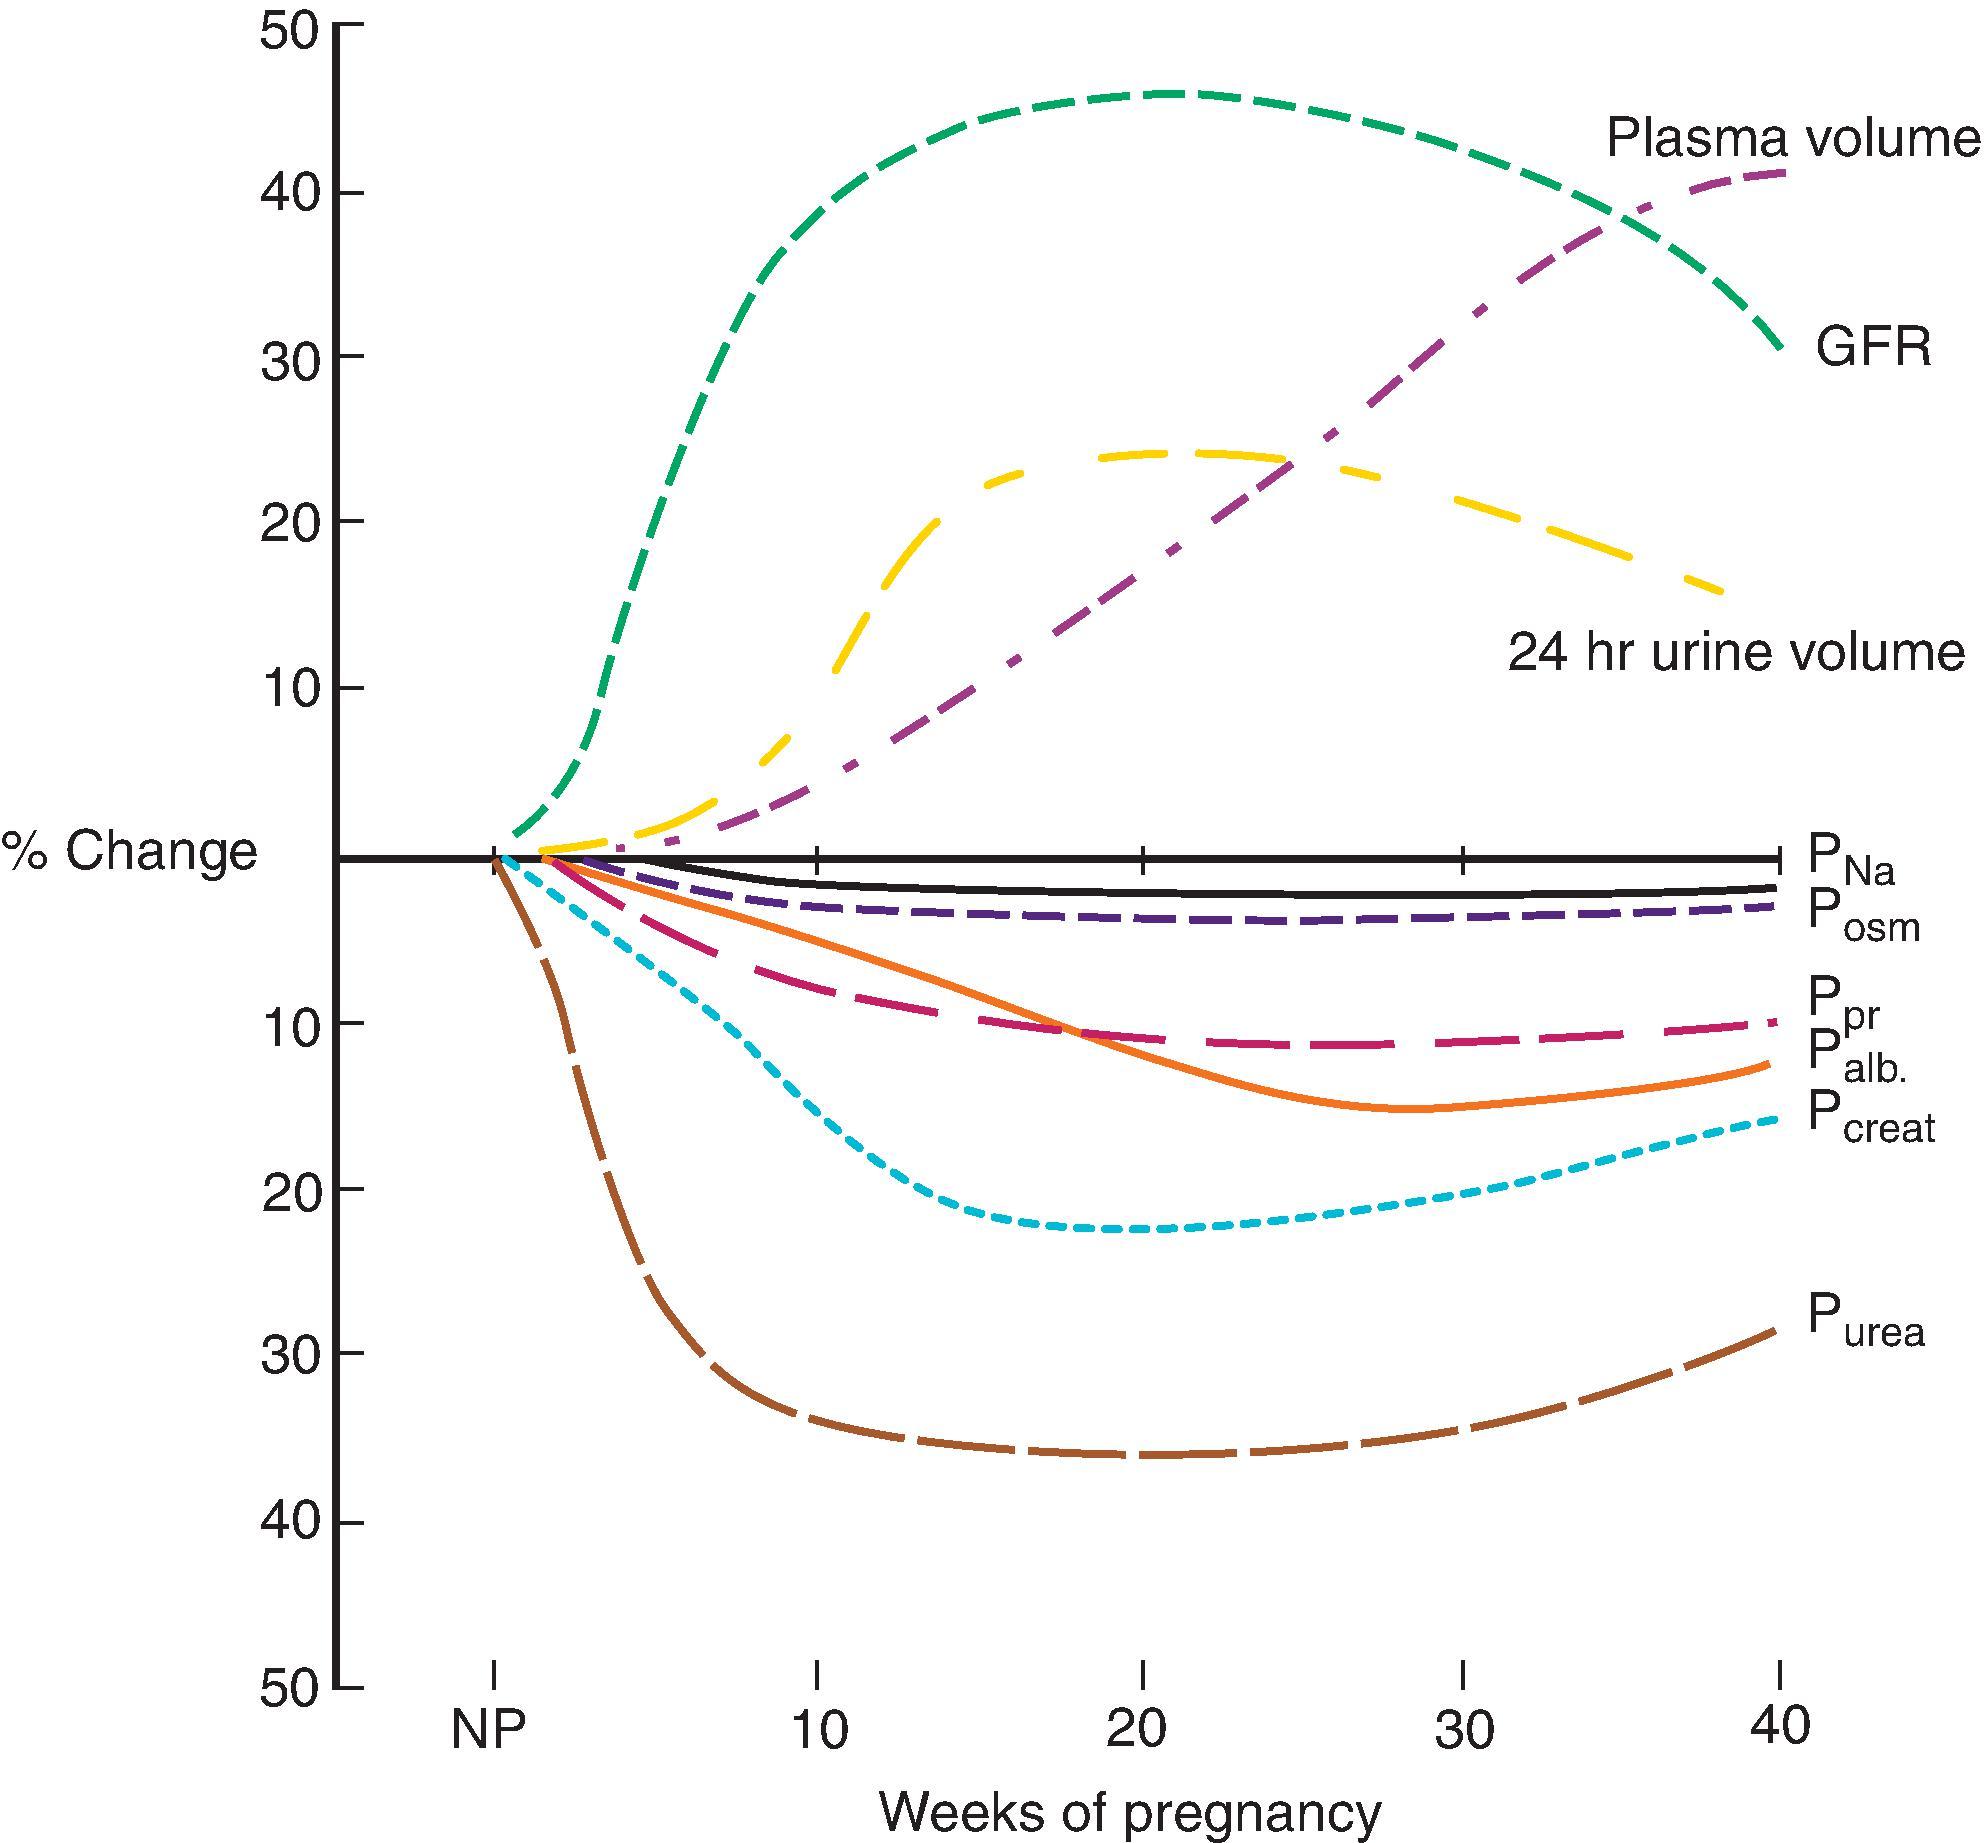 Fig. 47.1, Physiologic changes induced in pregnancy. Increments and decrements in various parameters are shown in percentage terms with reference to the nonpregnant baseline. GFR, Glomerular filtration rate; NP, nonpregnant; P alb , plasma albumin; P creat , plasma creatinine; P Na , plasma sodium; P osm , plasma osmolality; P pr , plasma proteins; P urea , plasma urea. (From Davison JM. The kidney in pregnancy: a review. J Royal Soc Med. 1983;76:485–500.)